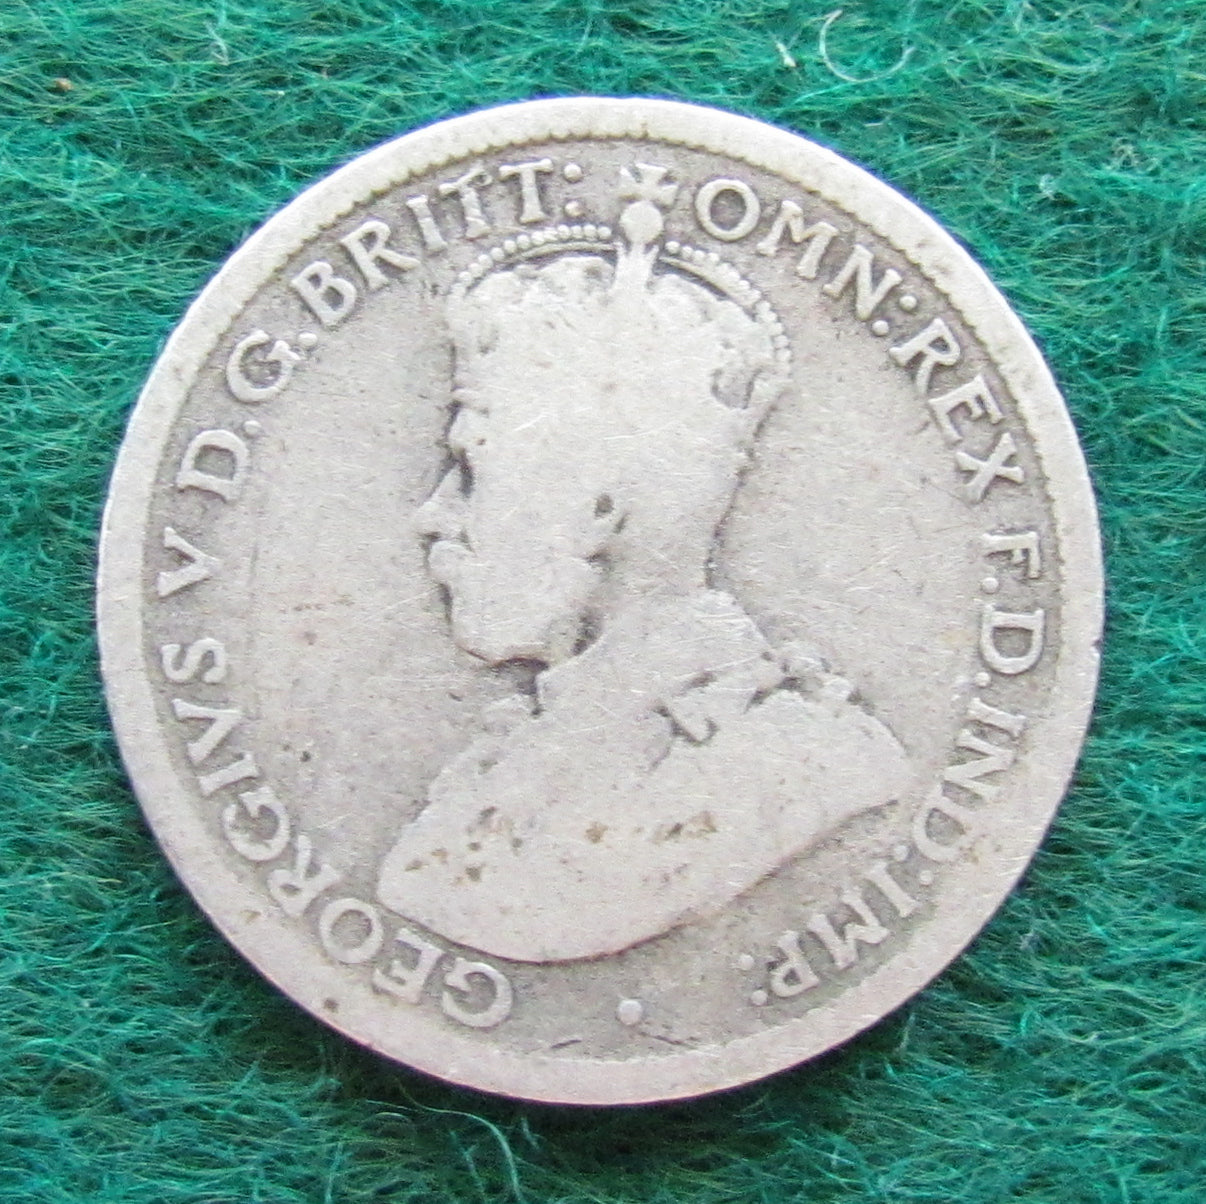 Australian 1914 6d Sixpence King George V Coin - Circulated